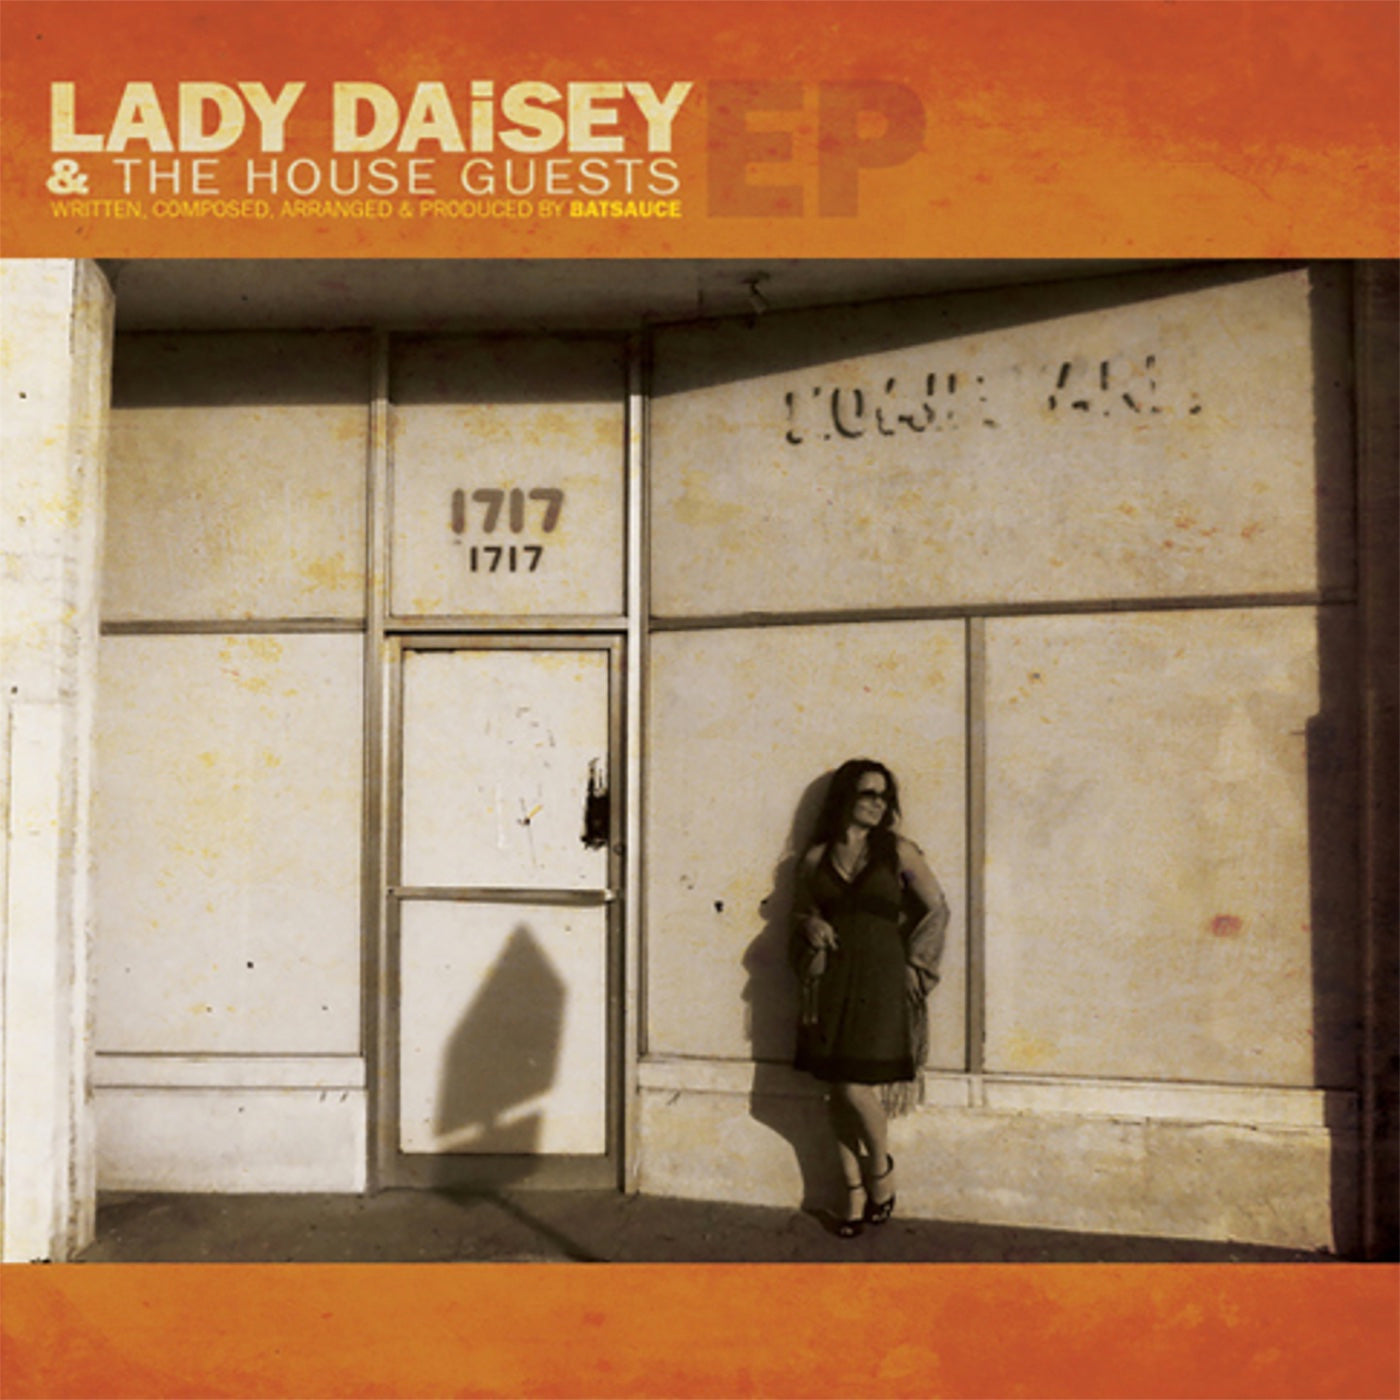 Lady Daisey - Lady Daisey & the House Guests